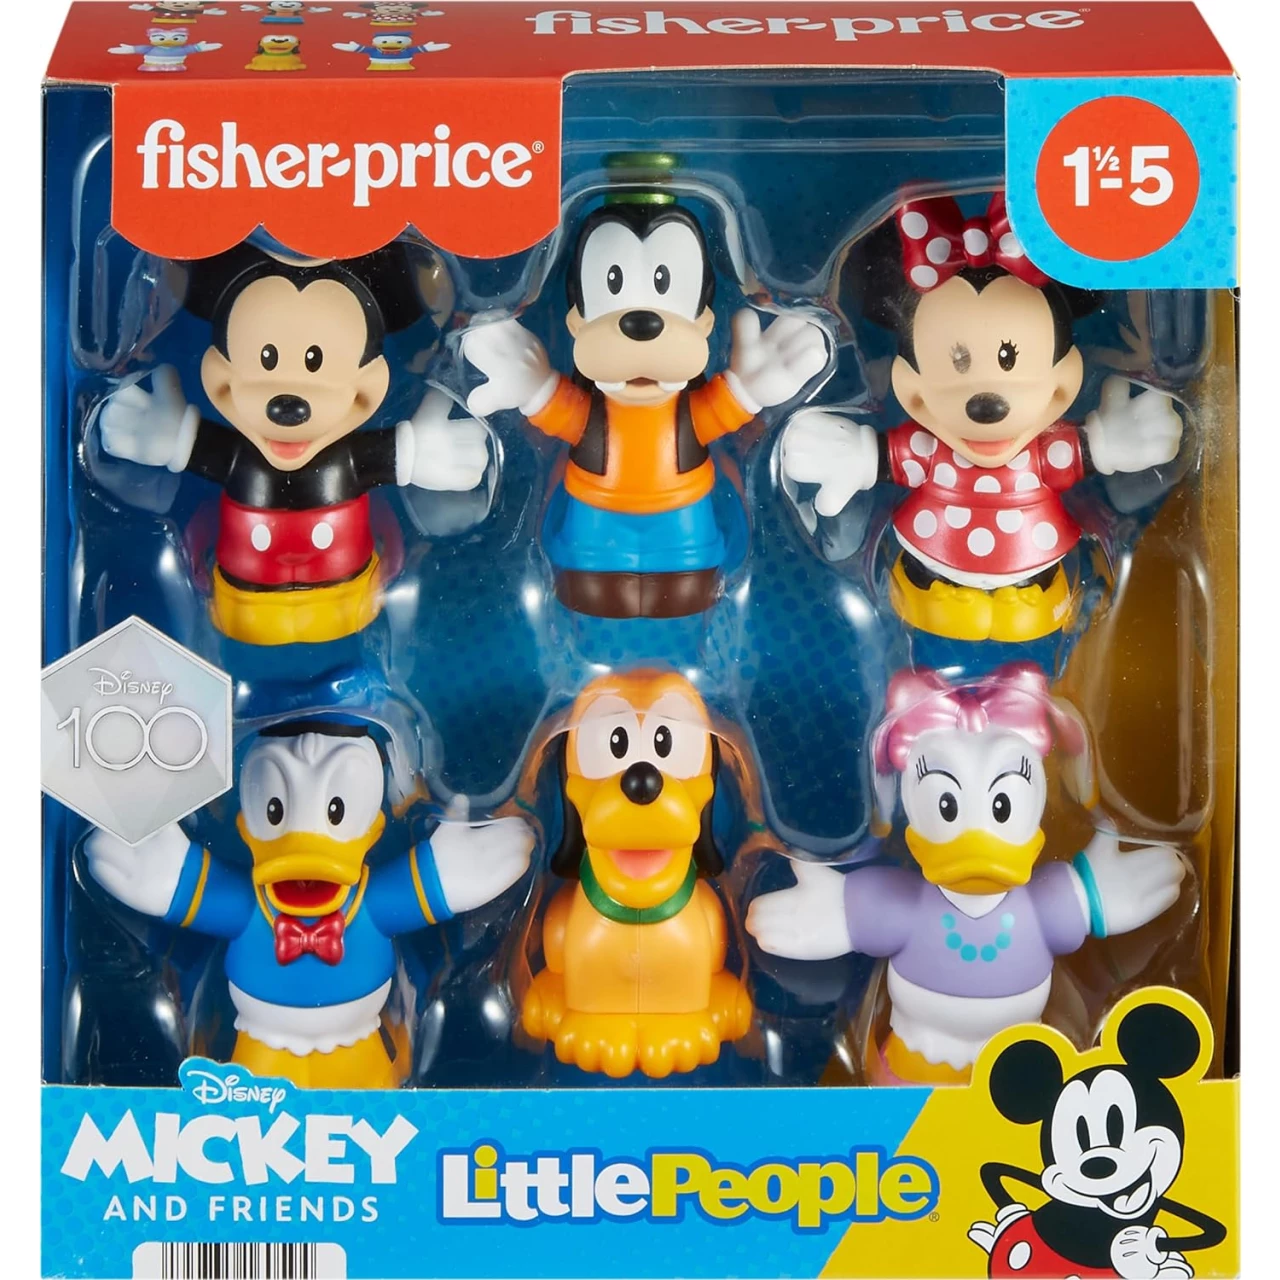 Fisher-Price Little People Toddler Toys Disney 100 Mickey &amp; Friends Figure Pack